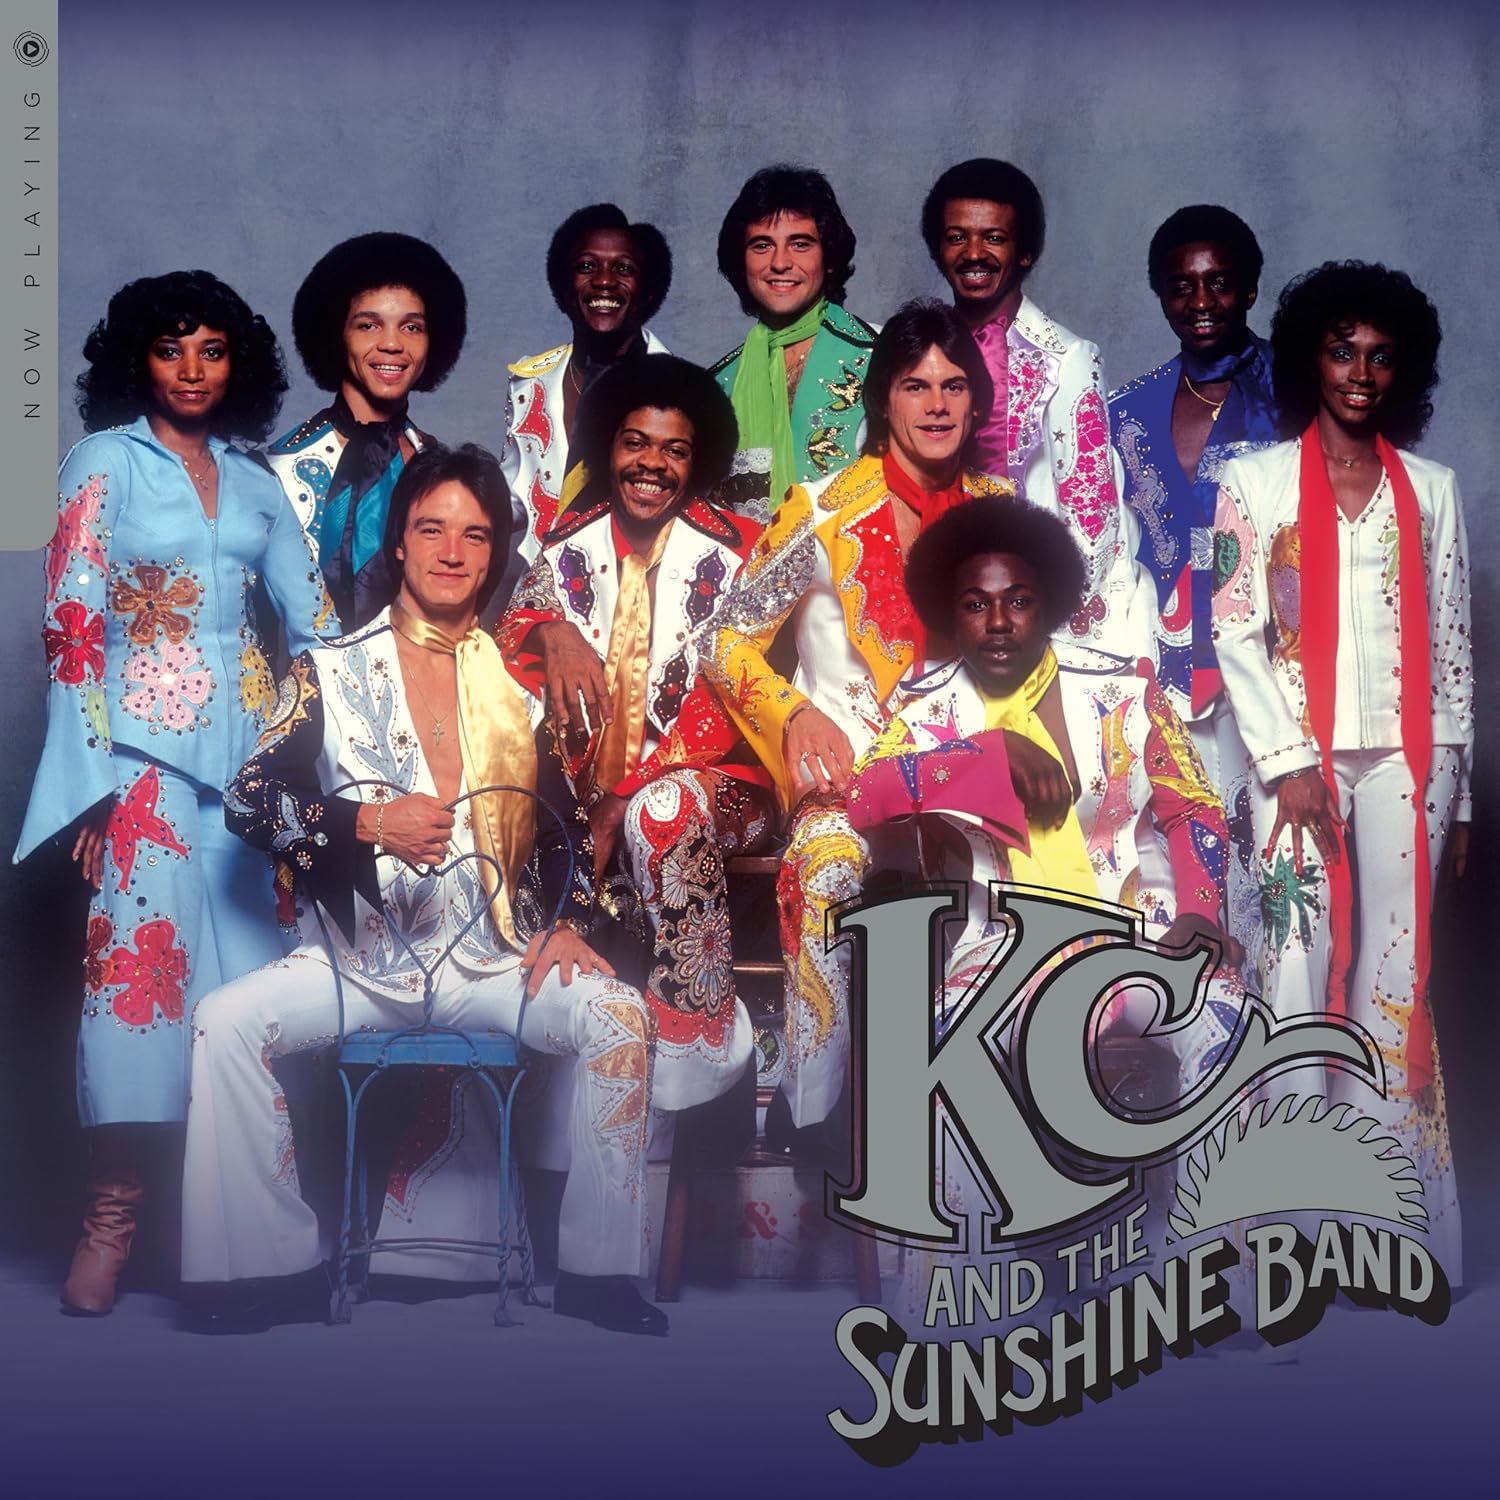 KC & THE SUNSHINE BAND – NOW PLAYING glitter ball clear vinyl LP